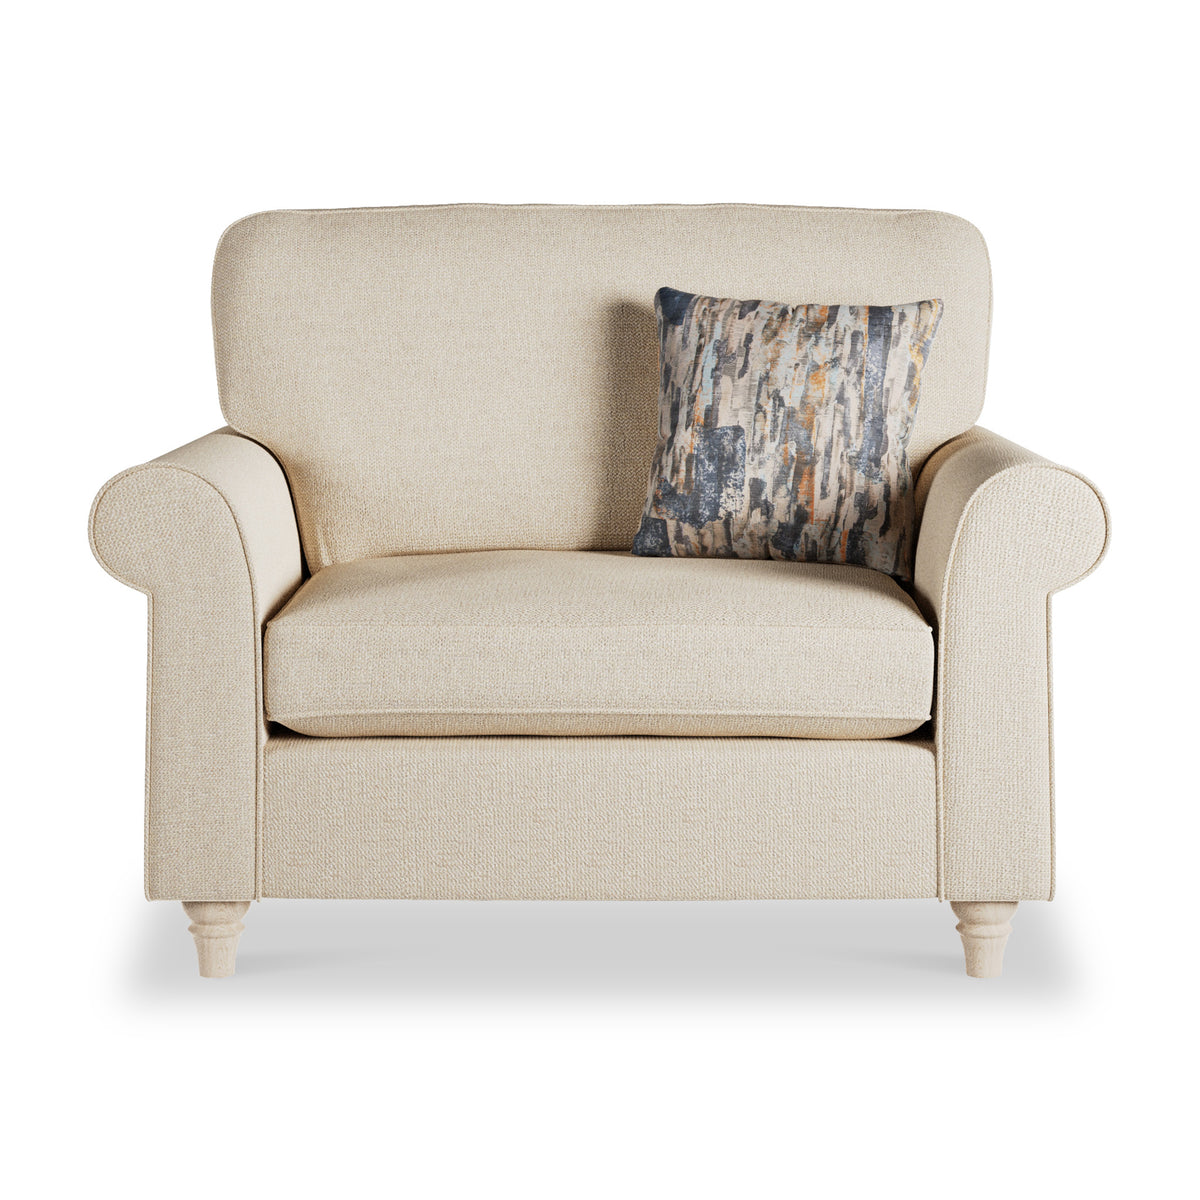 Jude Clay Snuggle Living Room Chair